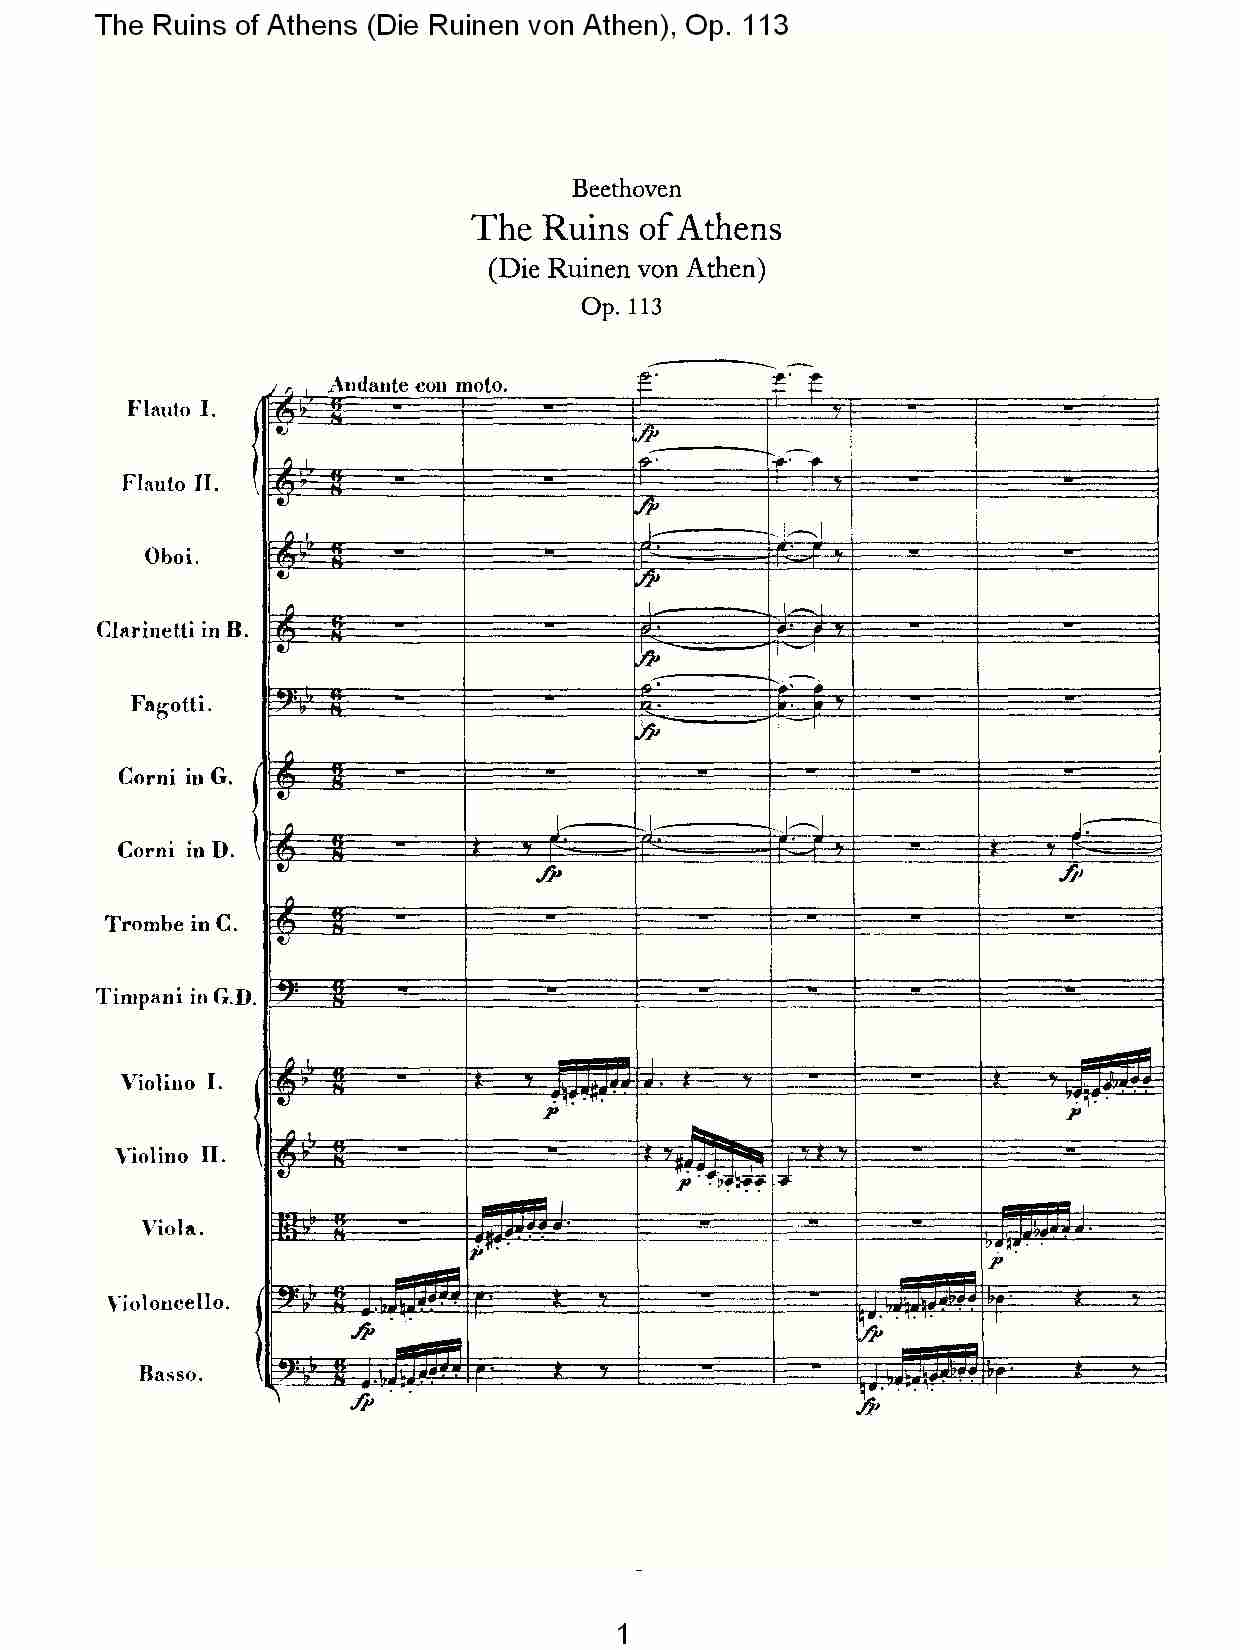 The Ruins of Athens Op. 113 第一乐章　（一）总谱（图1）